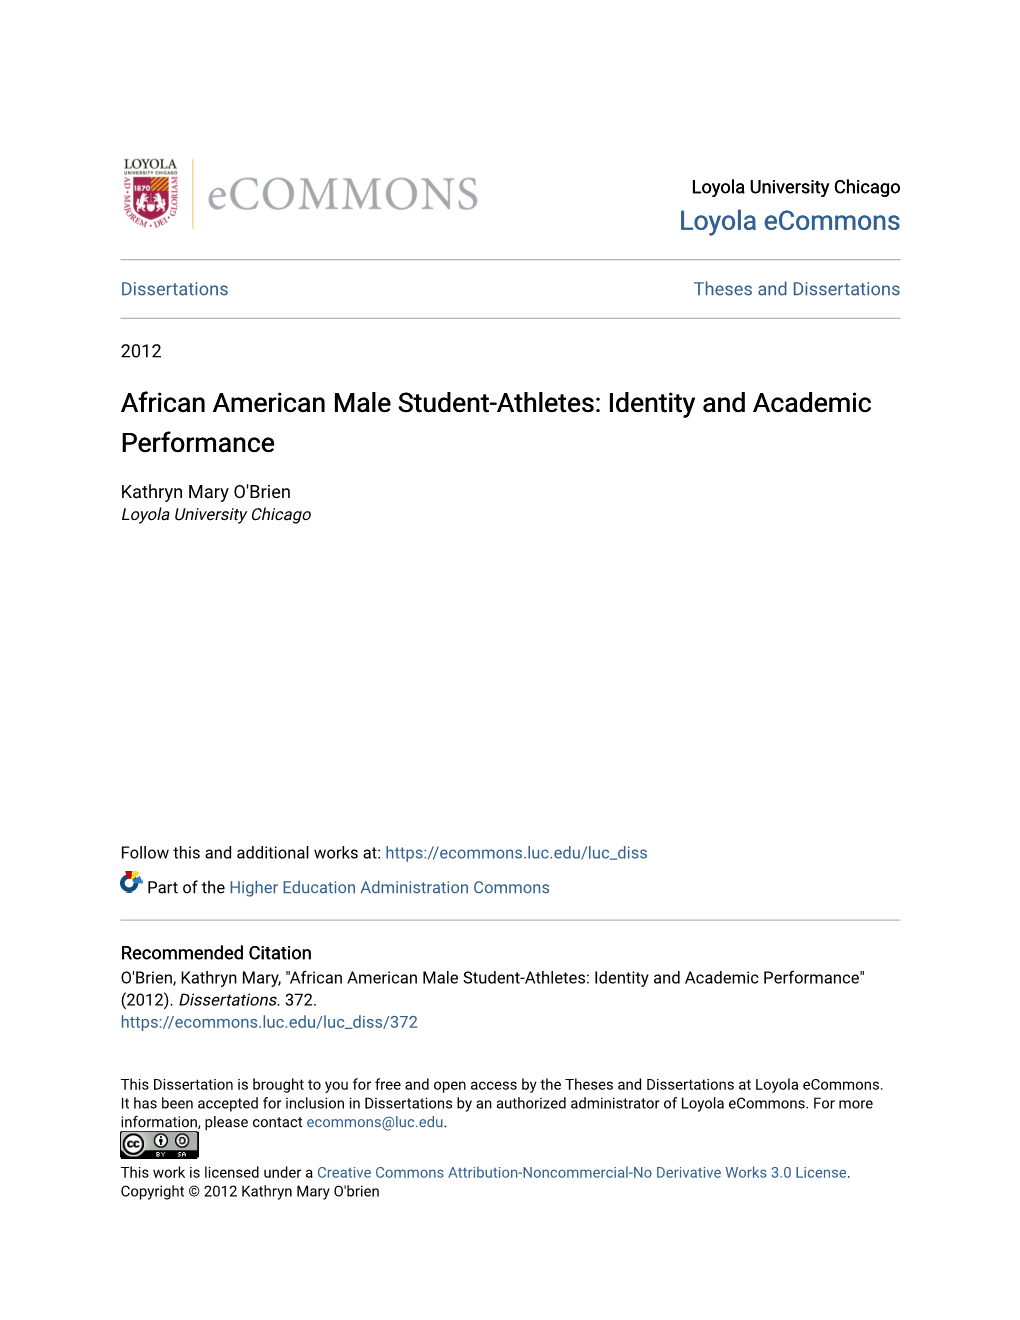 African American Male Student-Athletes: Identity and Academic Performance